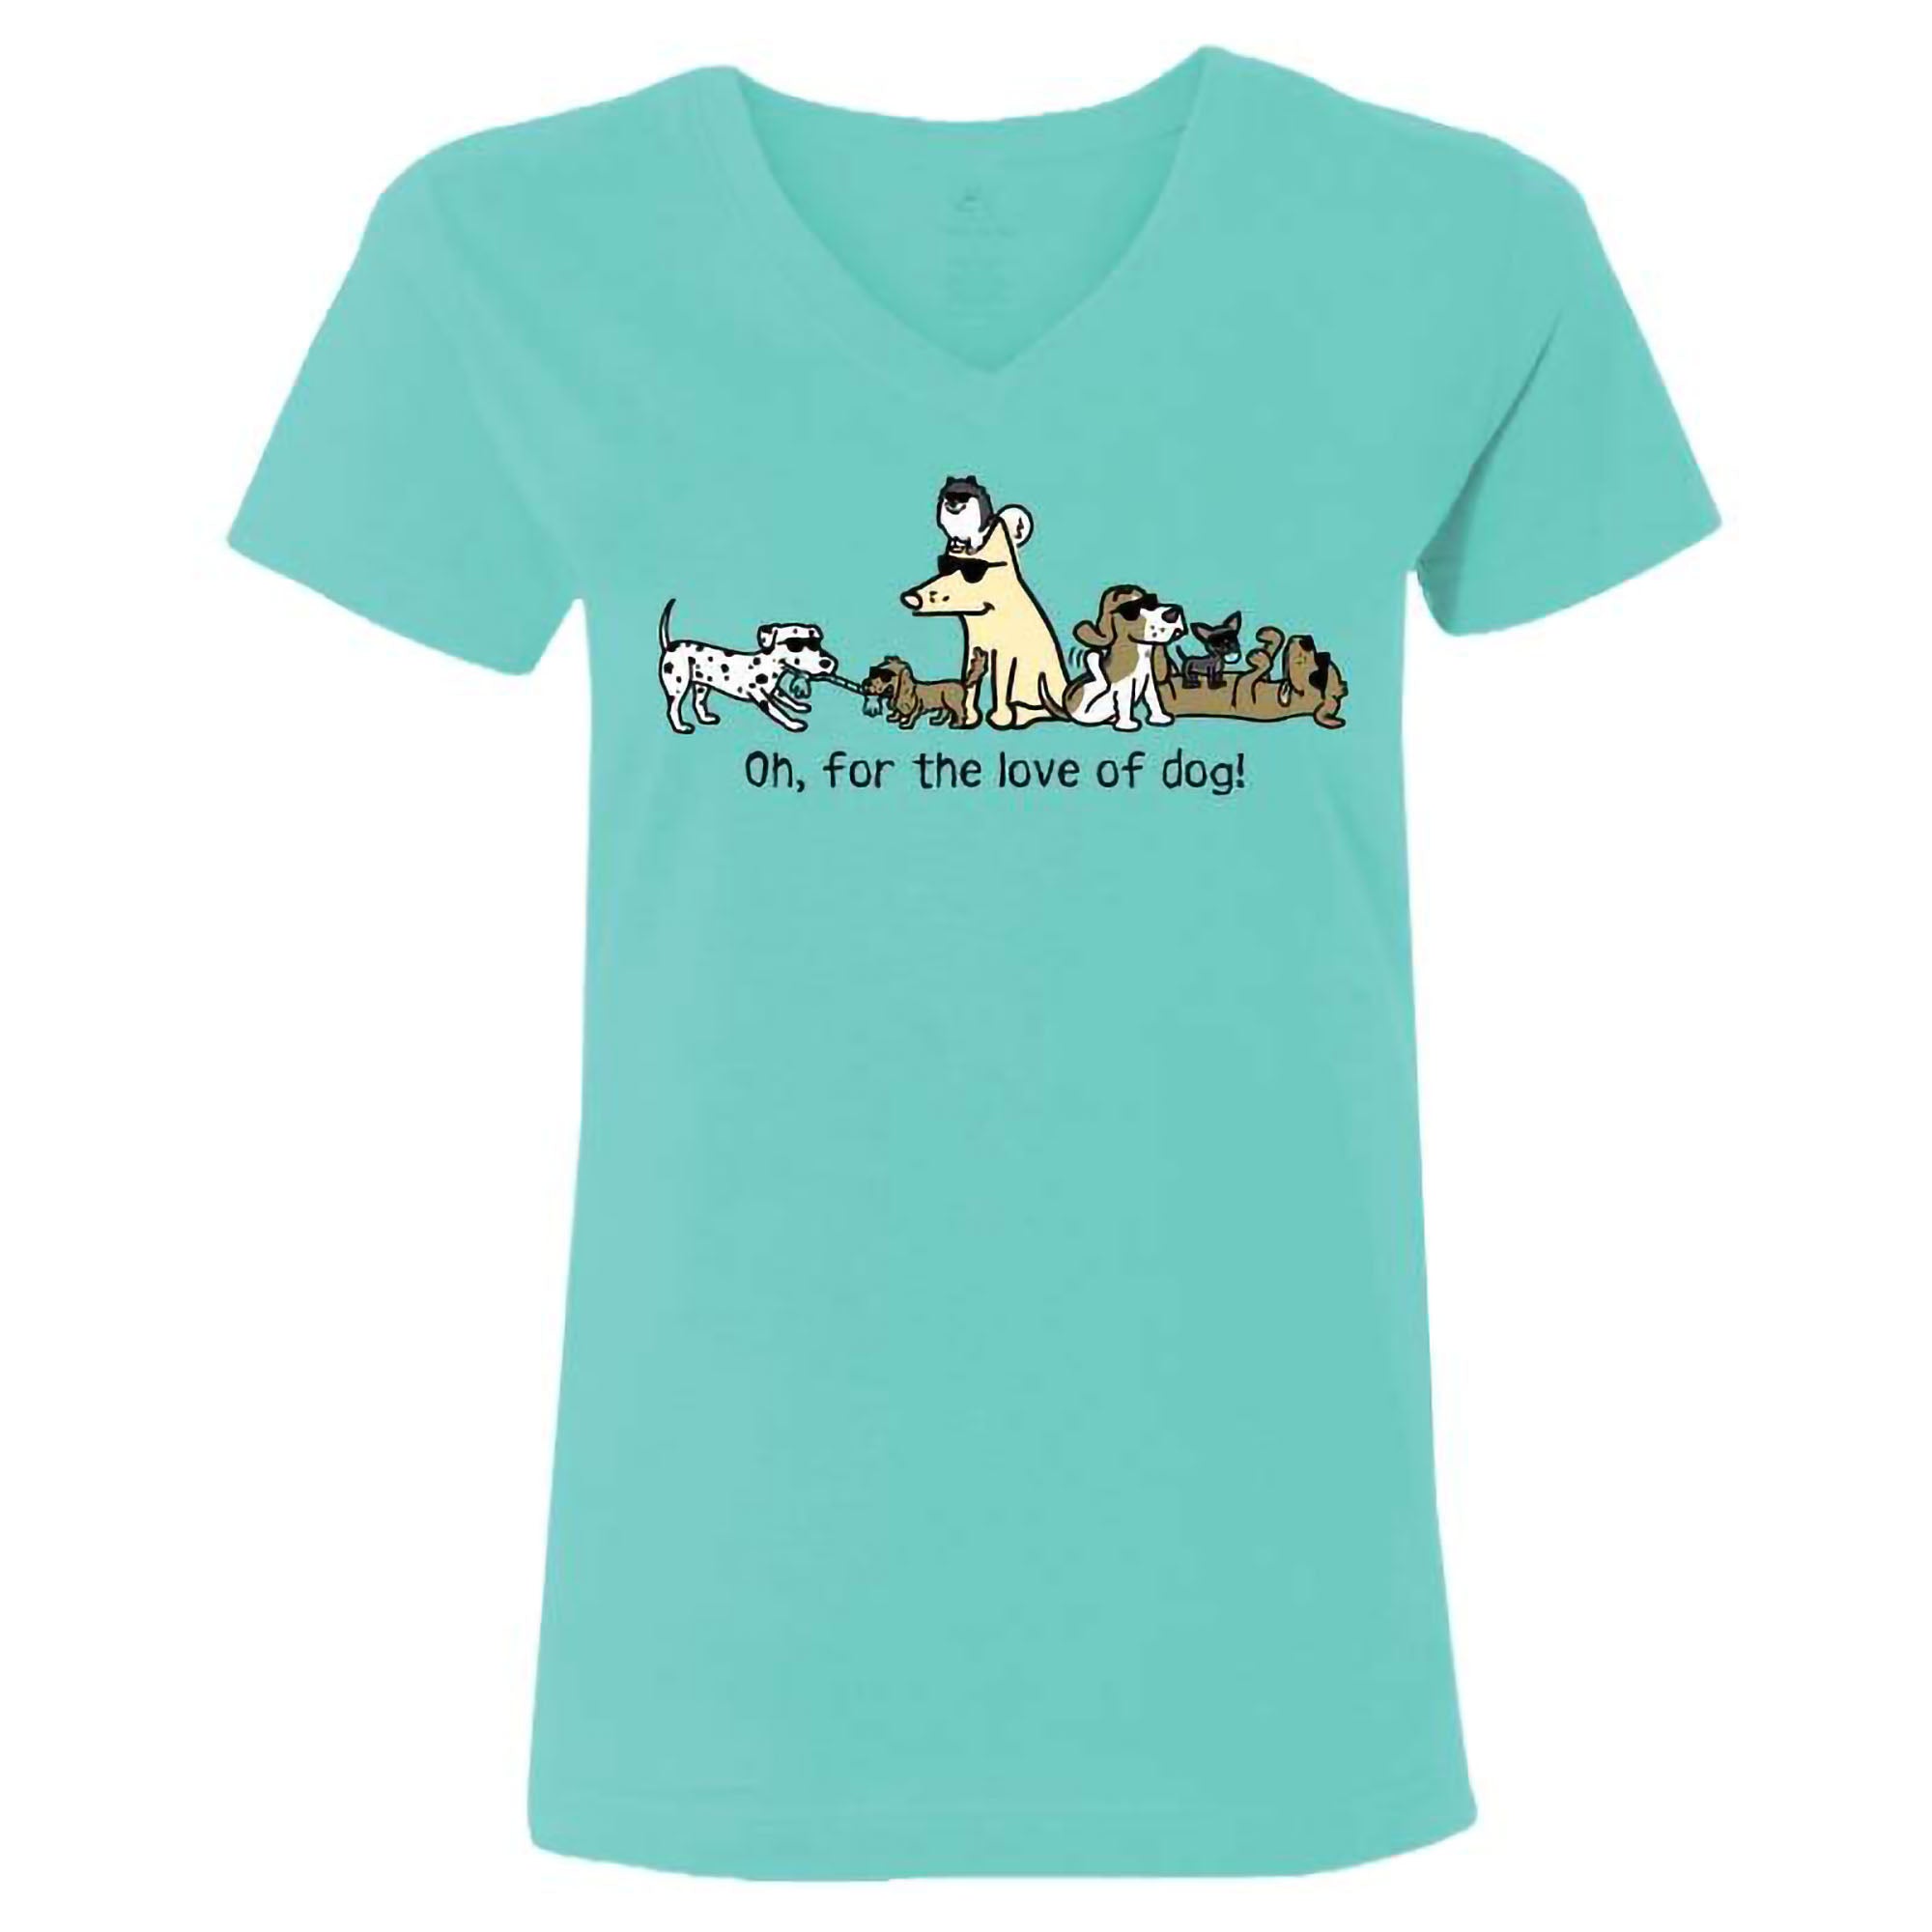 Teddy The Dog™ Love Of Dog! V-Neck - Chill Blue - XX-Large